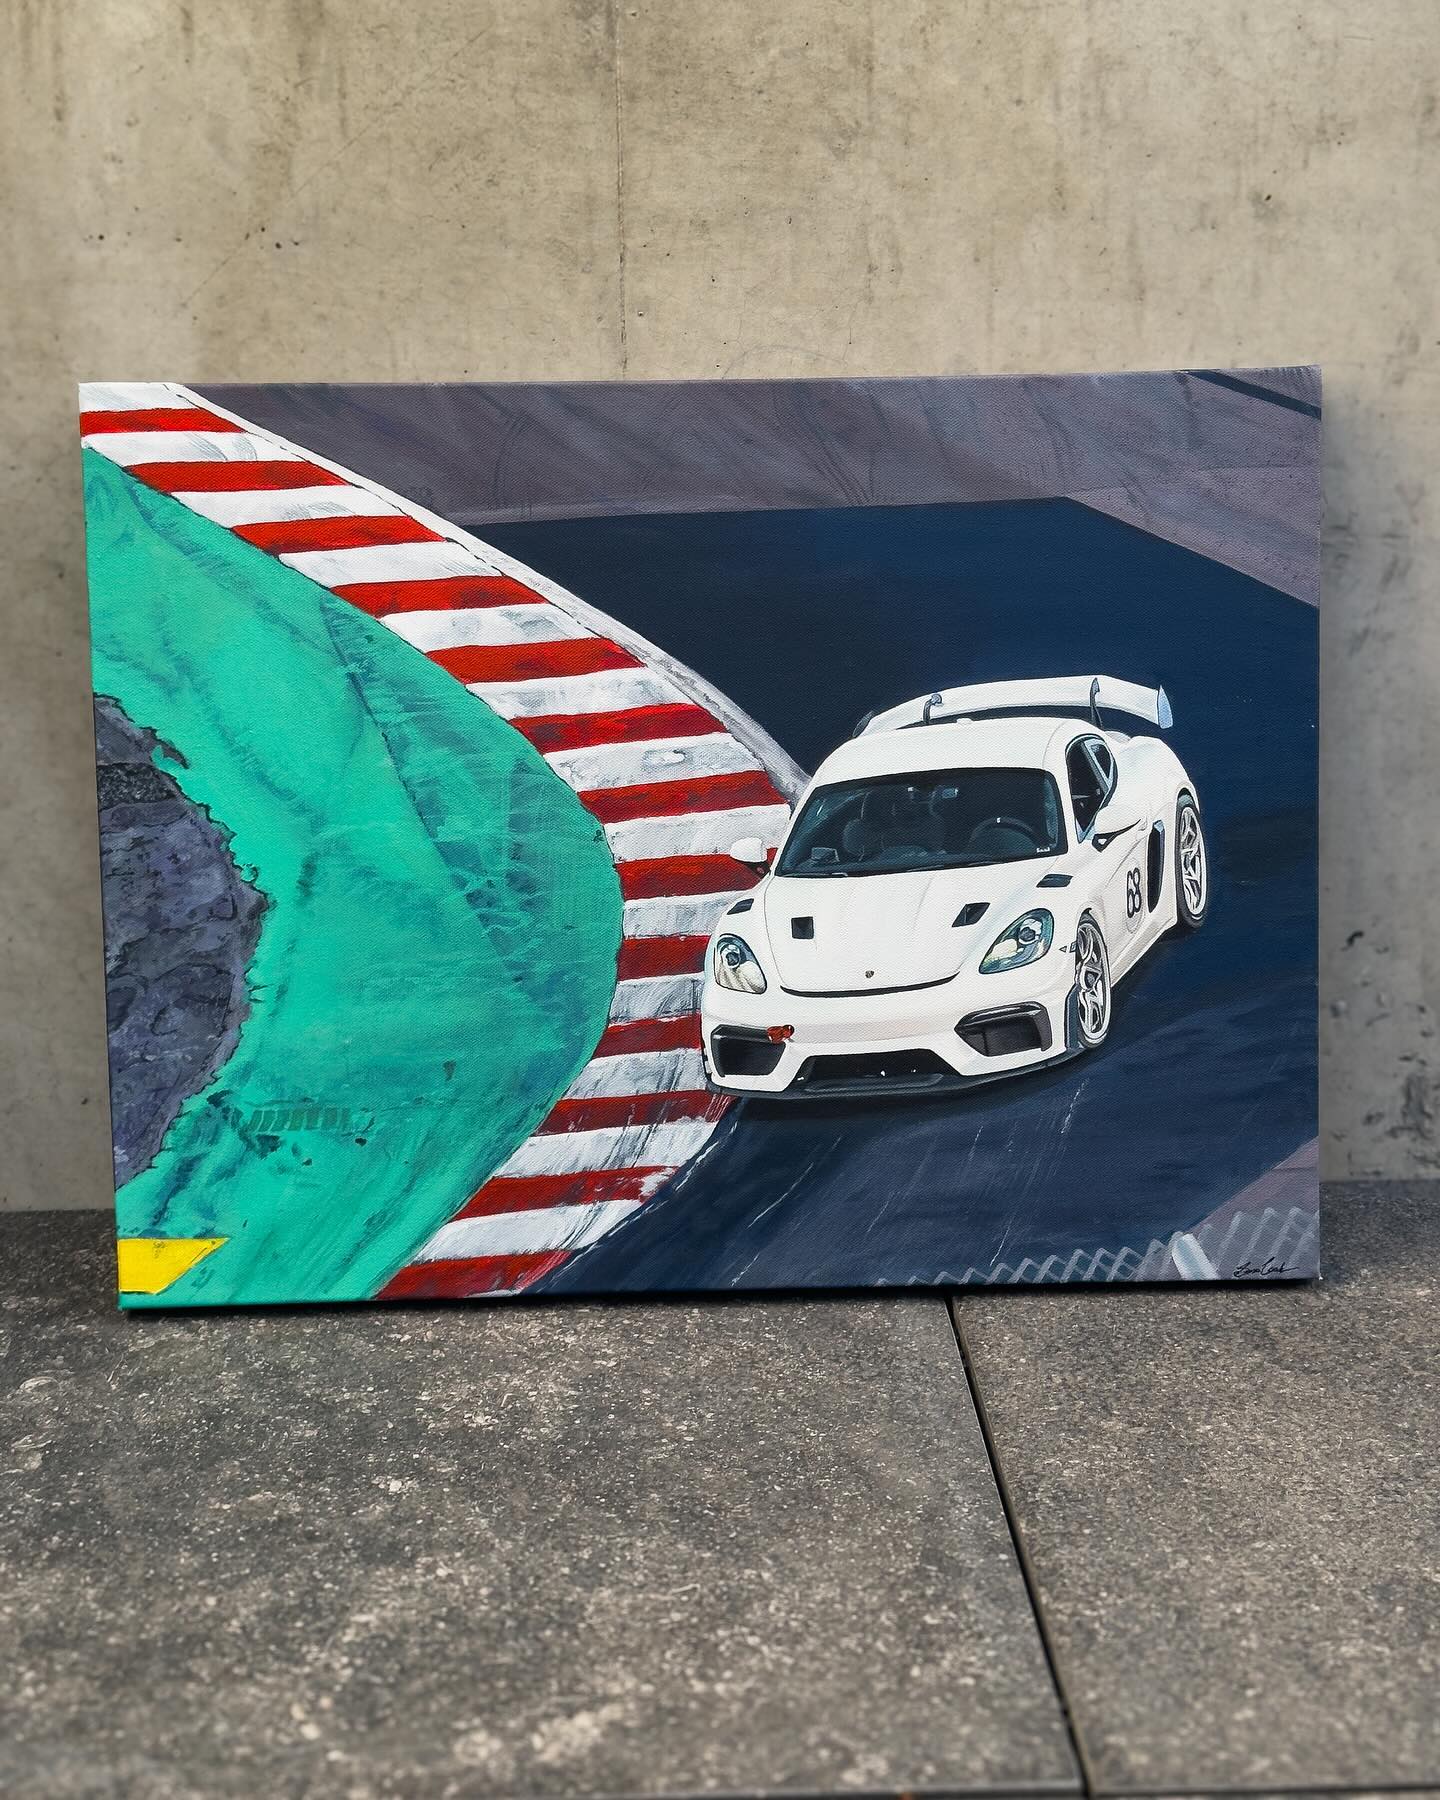 The complete 18x24 GT4RS on the Laguna Seca corkscrew!! This was an absolutely incredible composition to work with, one with a focus on motion, aged track surface, and revealing what the GT4RS was truly built for. 

@ontrack_offroad was incredibly kind to commission this piece from me, excitedly following the process of one of my absolute favorite creations!

#automotiveartwork #porscheartwork #gt4rs #automotiveartist #carpaintings